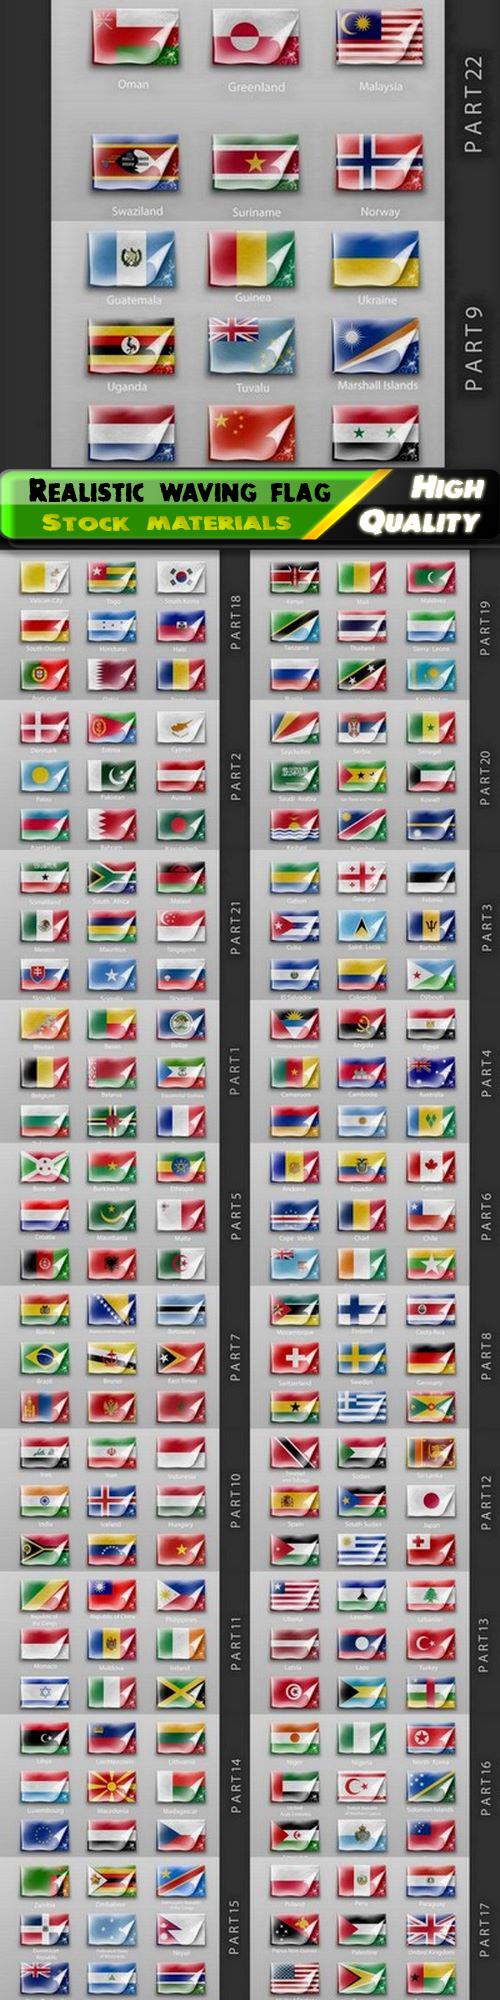 Realistic waving flag of countries of the world 2 - 22 Eps